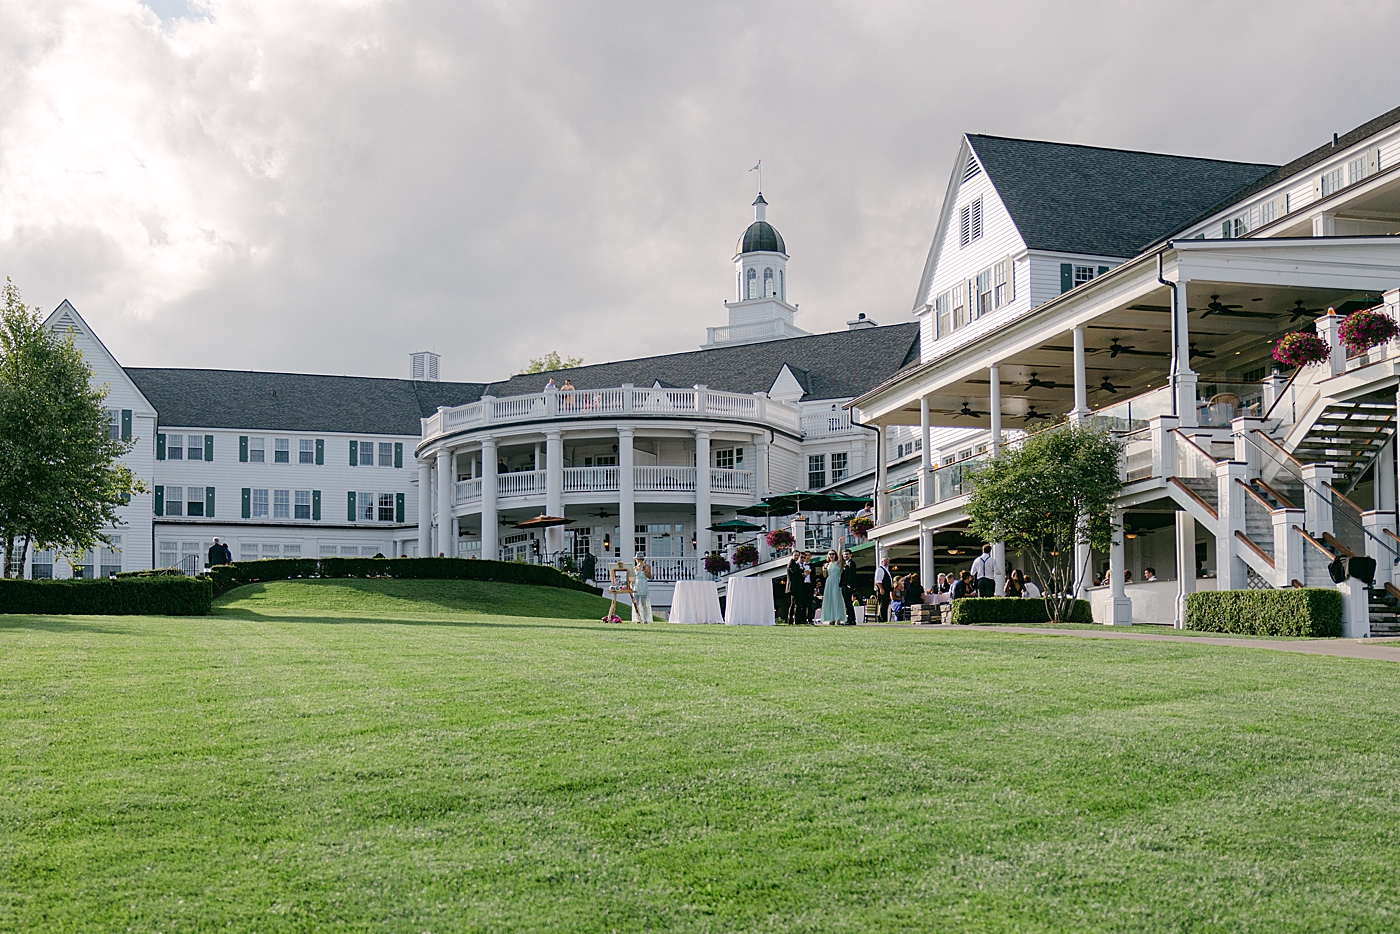 Venue image of grand, green lawn and multi-story white building | Image by Hope Helmuth Photography